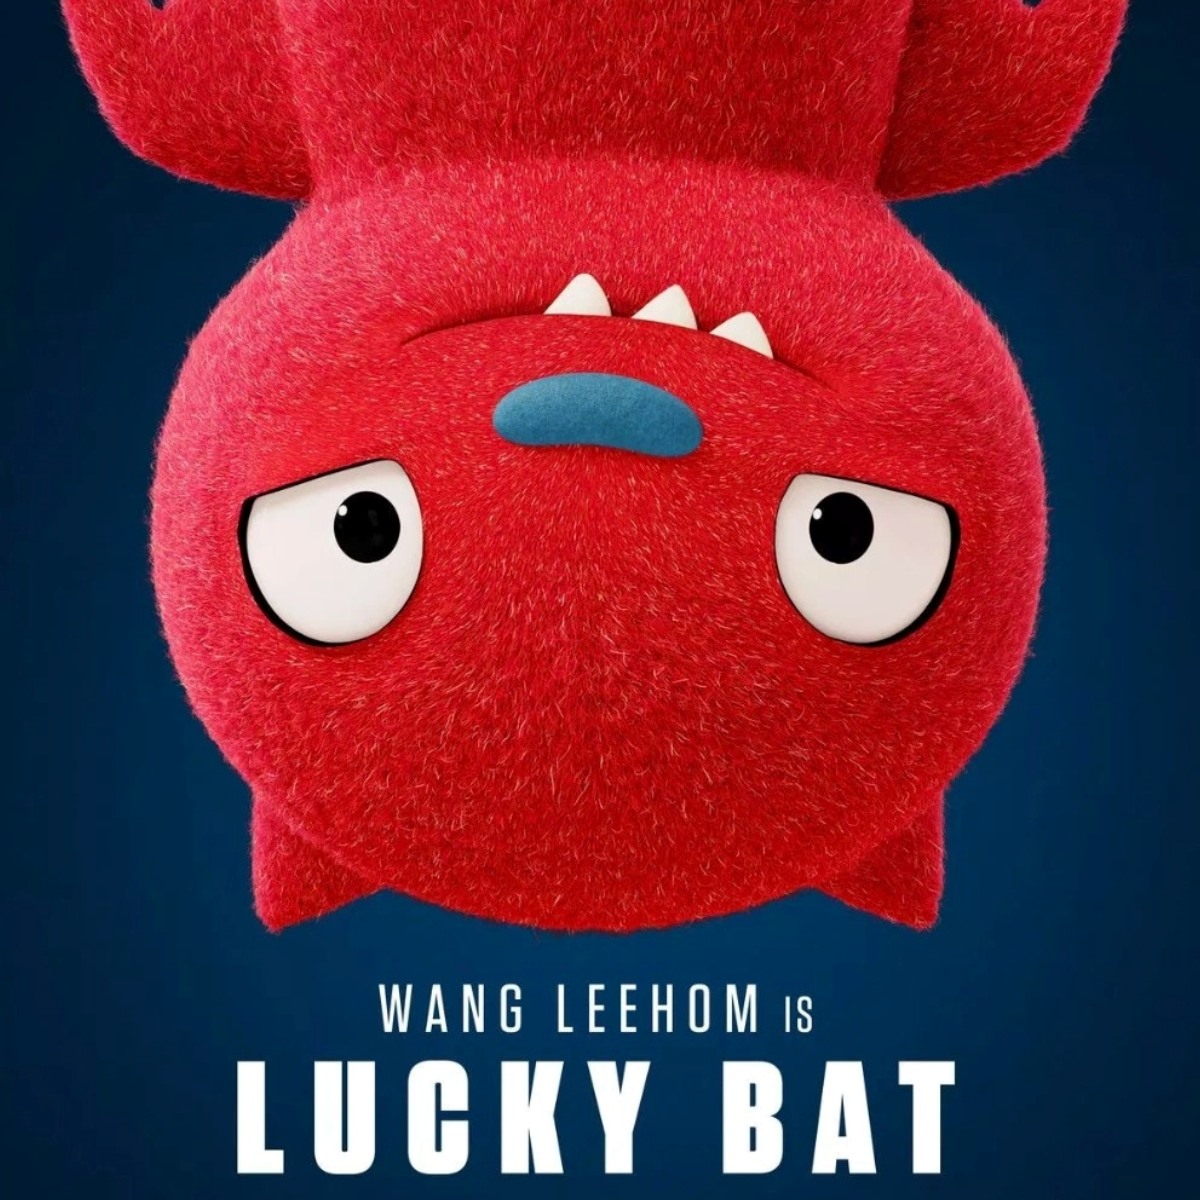 12-facts-about-lucky-bat-lucky-bat-and-lily